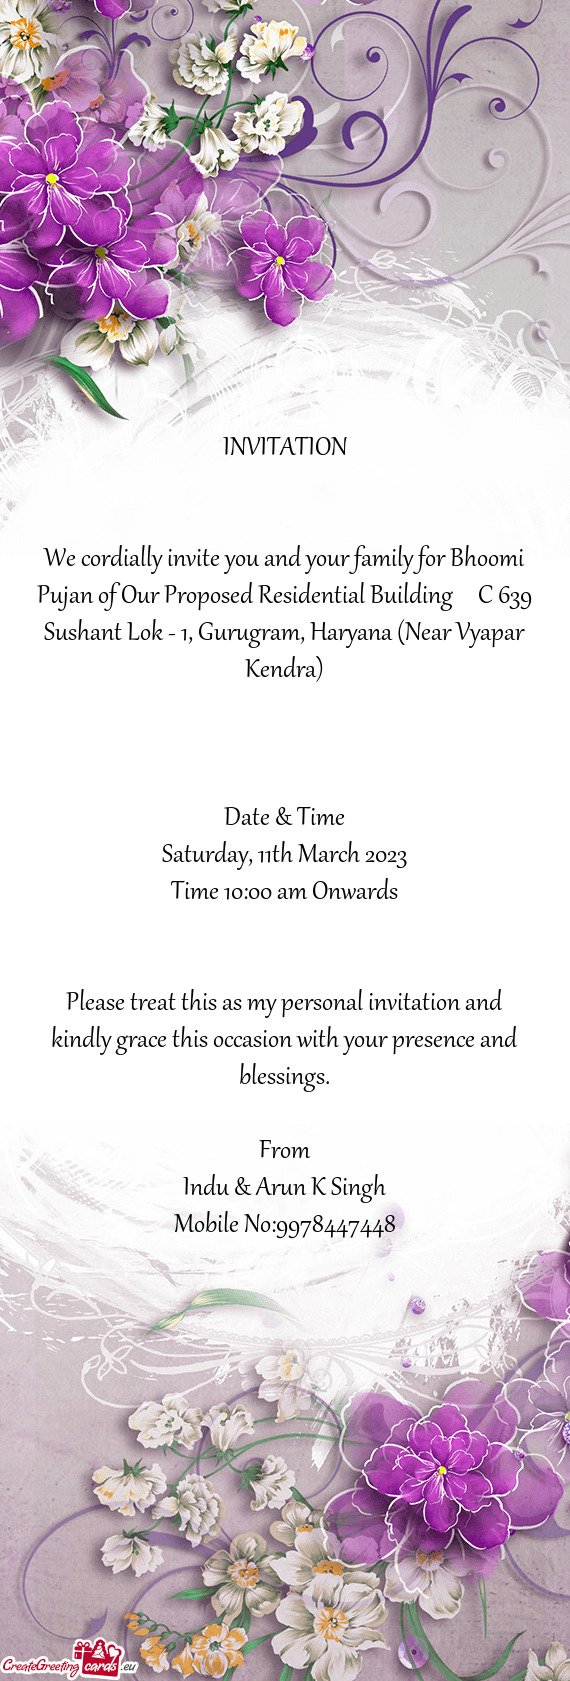 We cordially invite you and your family for Bhoomi Pujan of Our Proposed Residential Building  C